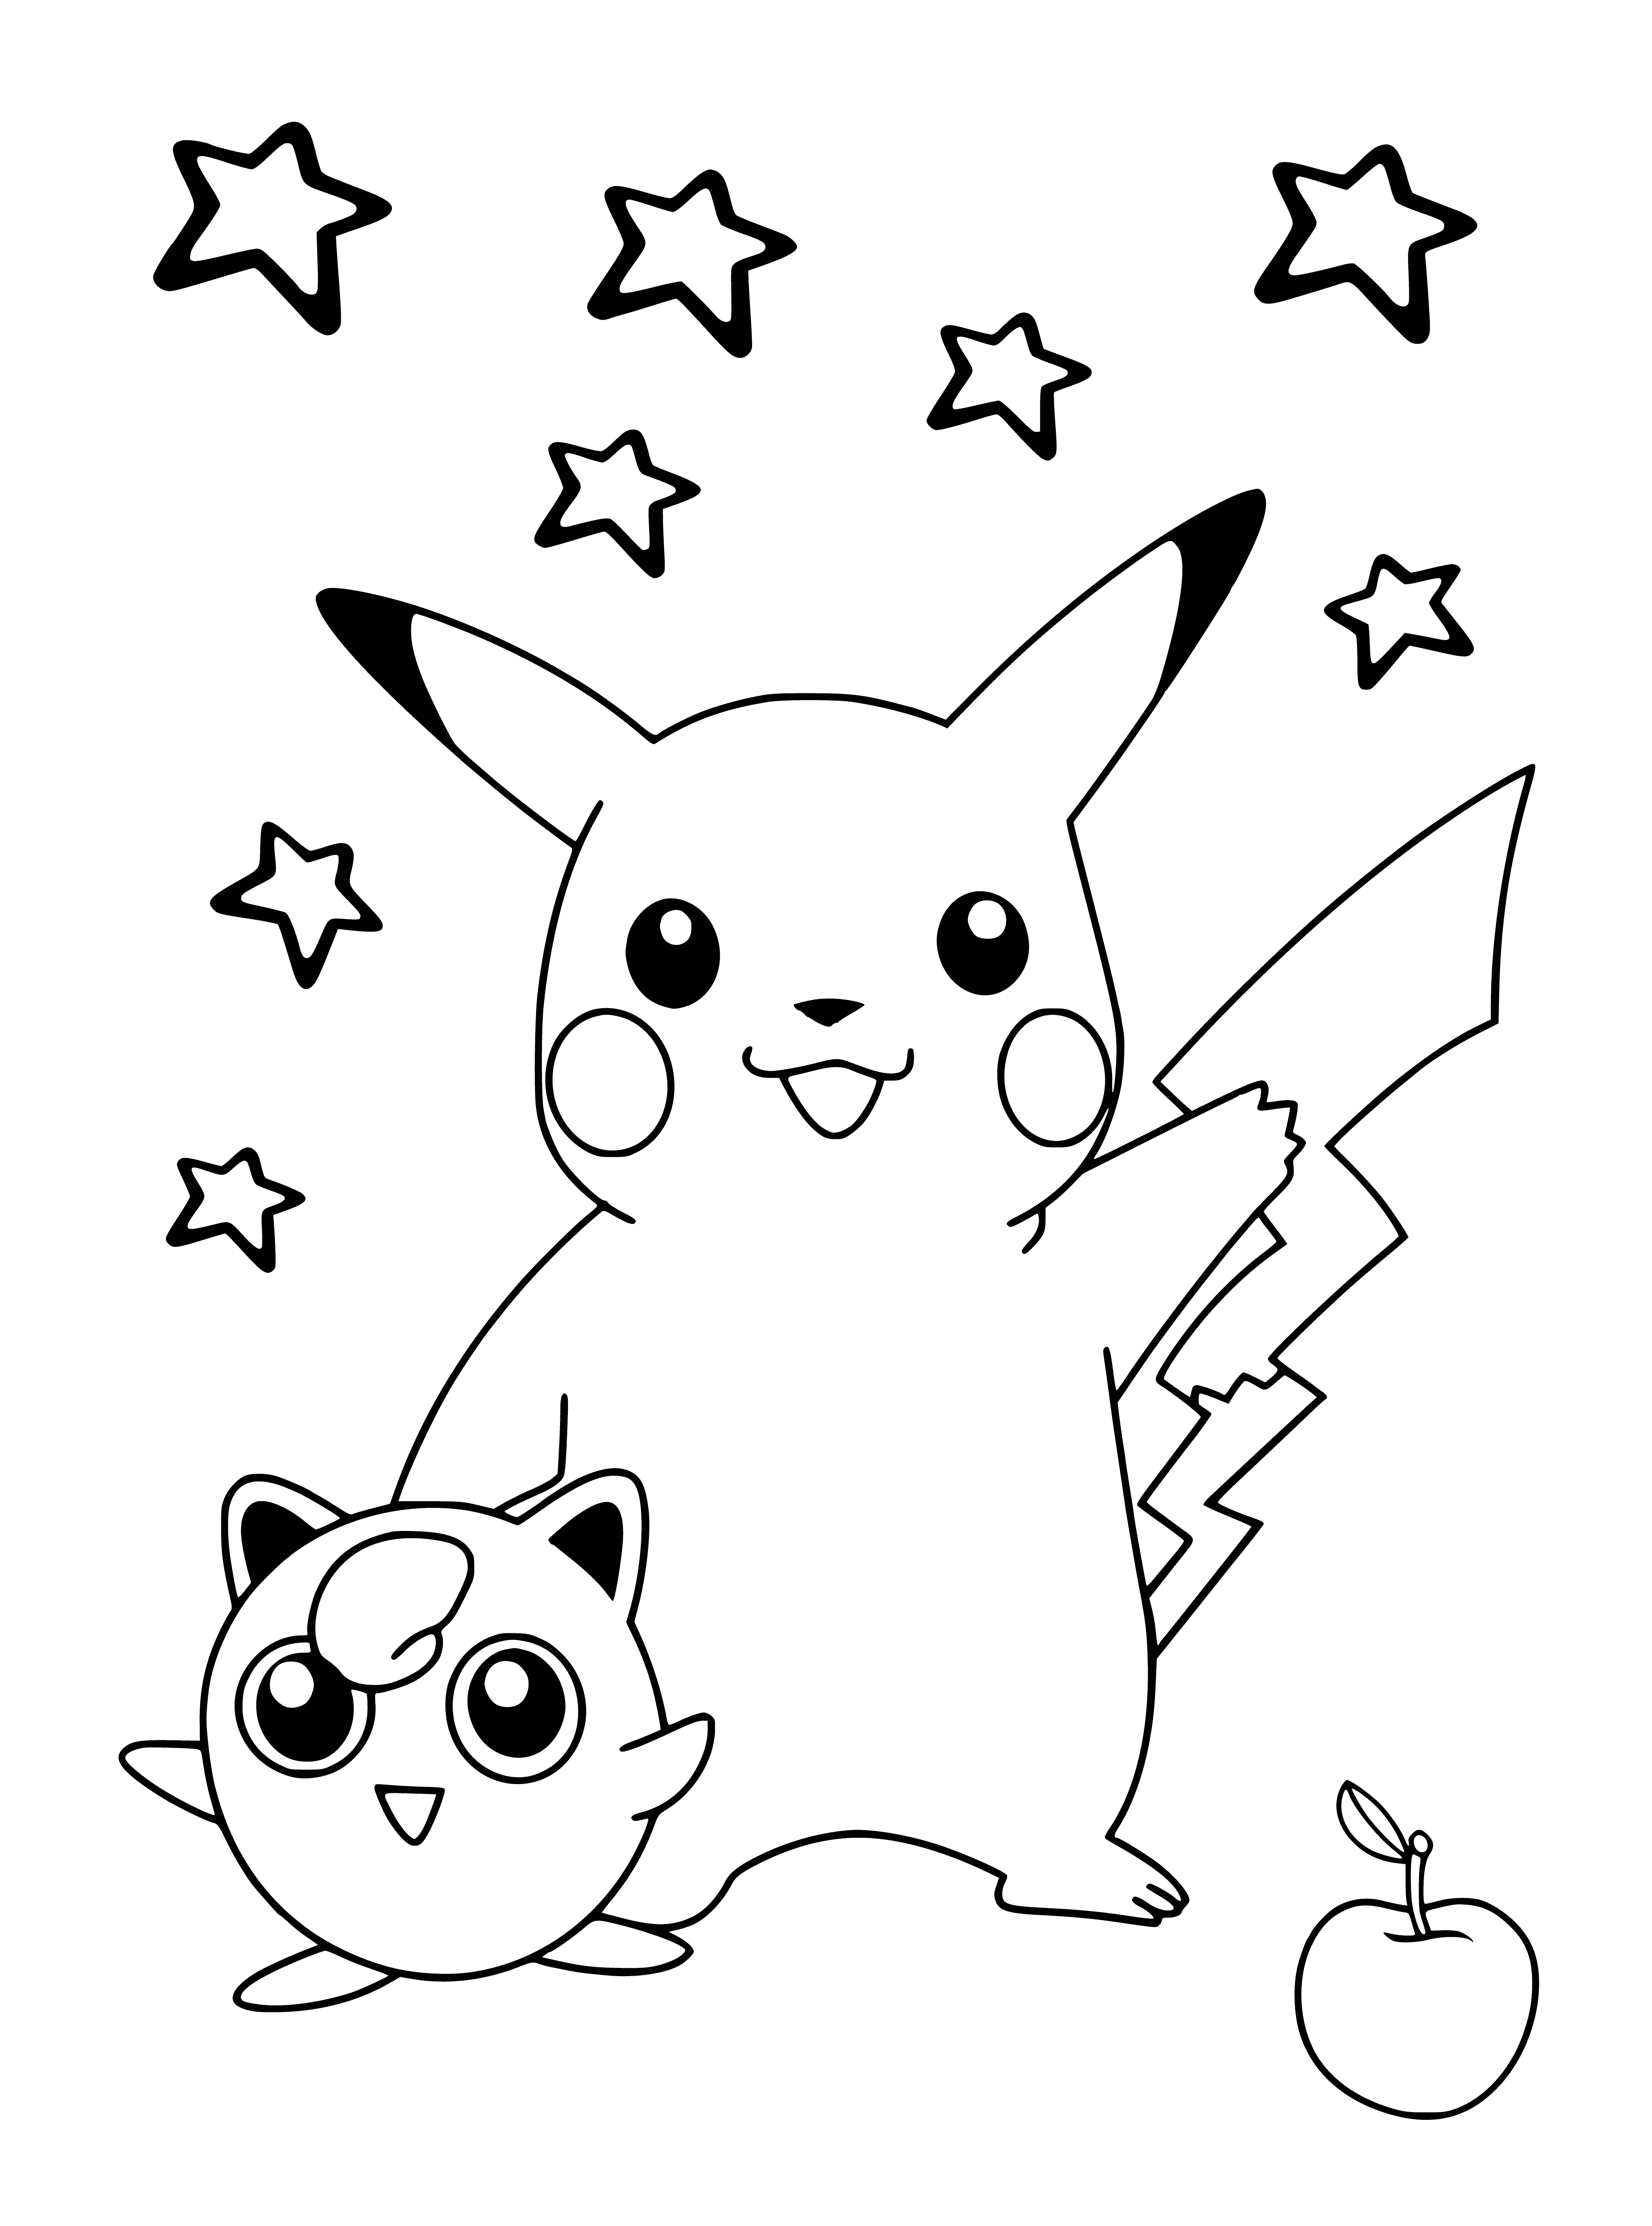 coloring page: Pikachu is an iconic mouse-like Pokémon with yellow body, black stripes, lightning bolt-shaped tail, brown eyes, and electricity attacking moves.